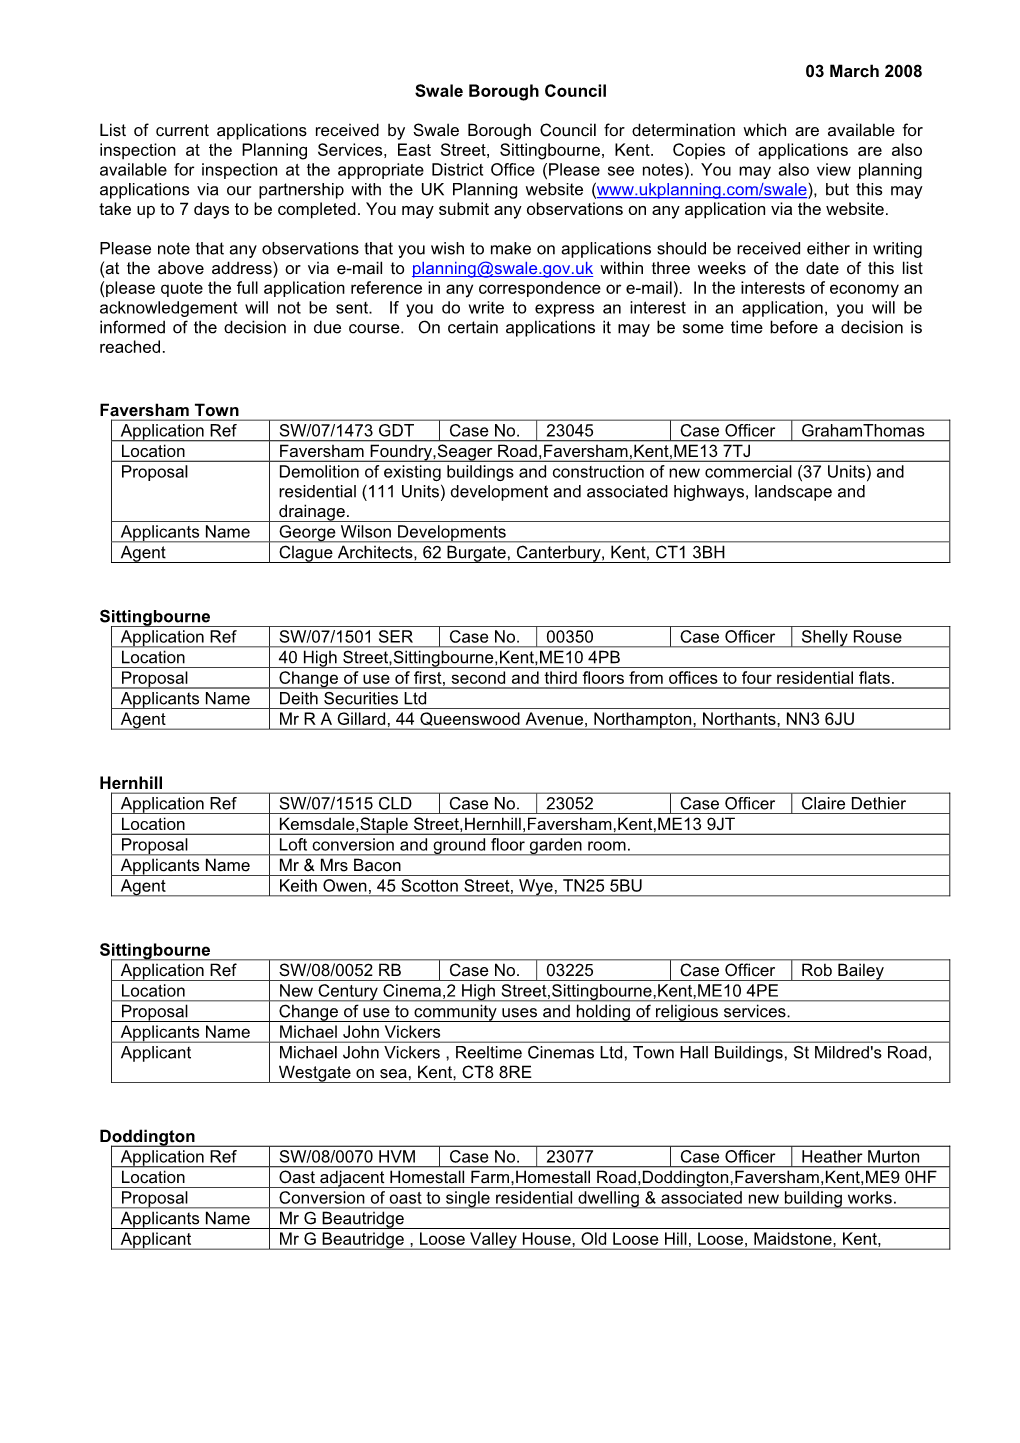 03 March 2008 Swale Borough Council List of Current Applications Received by Swale Borough Council for Determination Which Are A